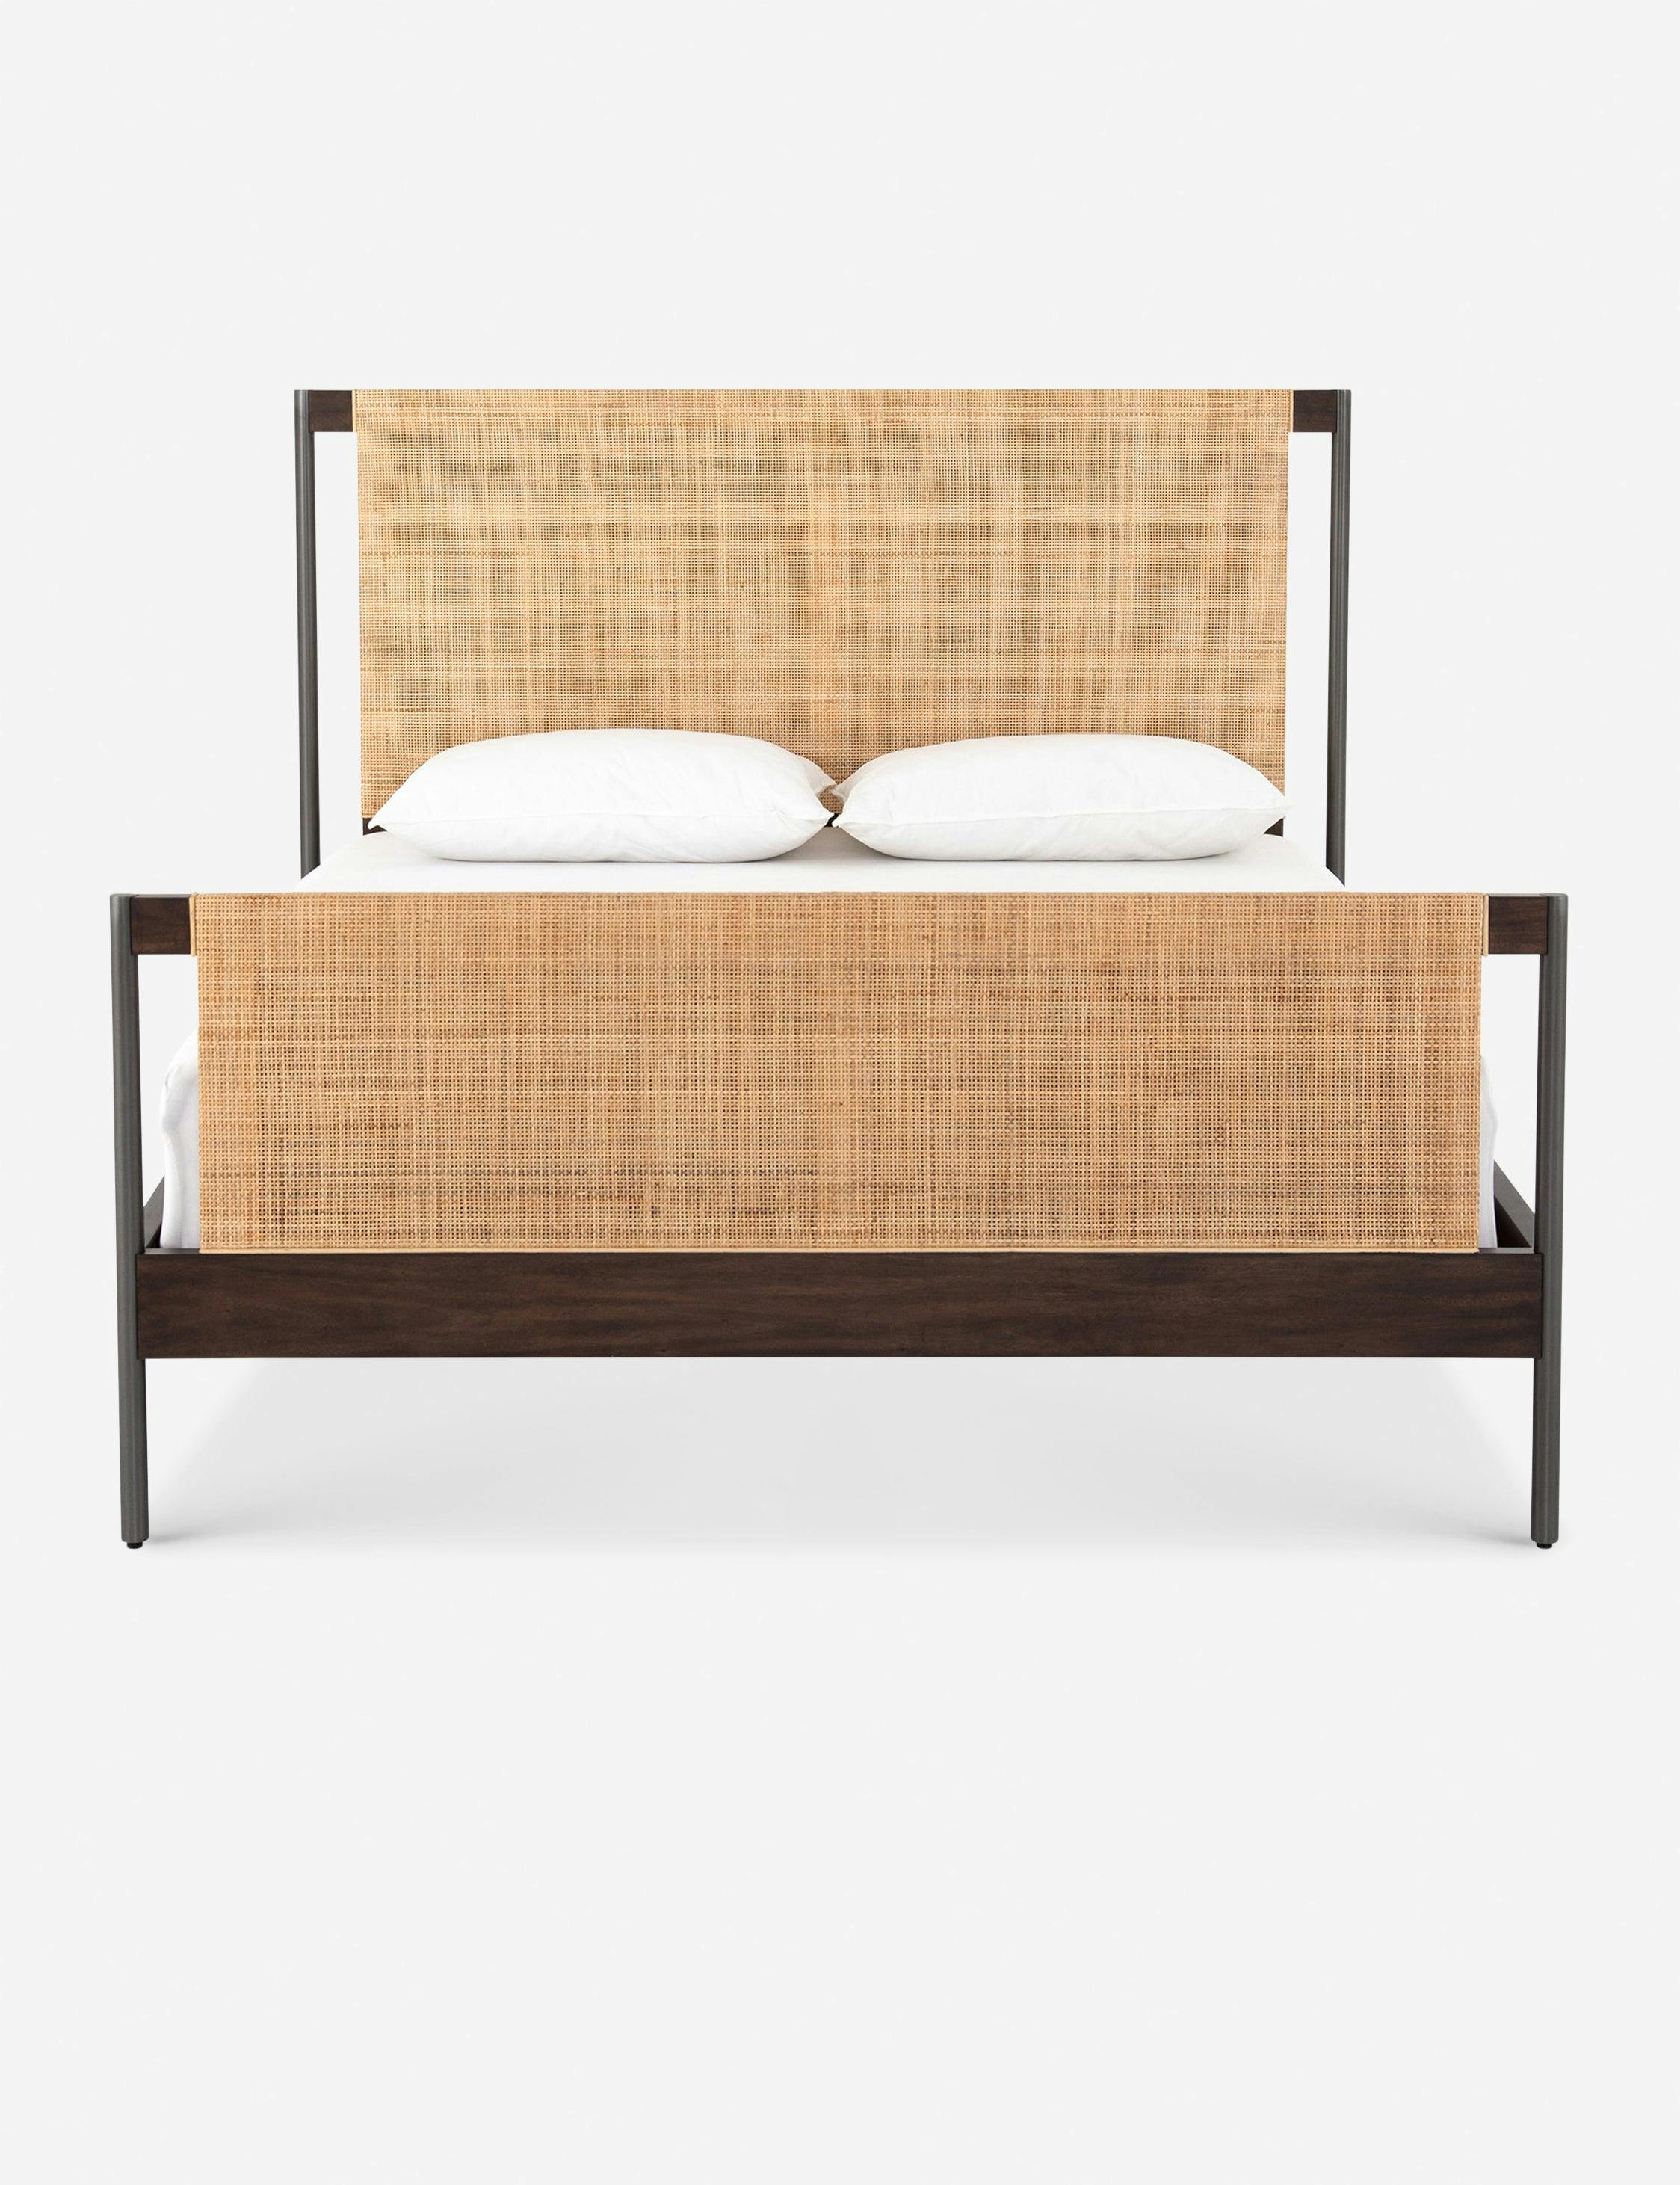 Callahan King-Sized Platform Bed with Woven Cane Headboard